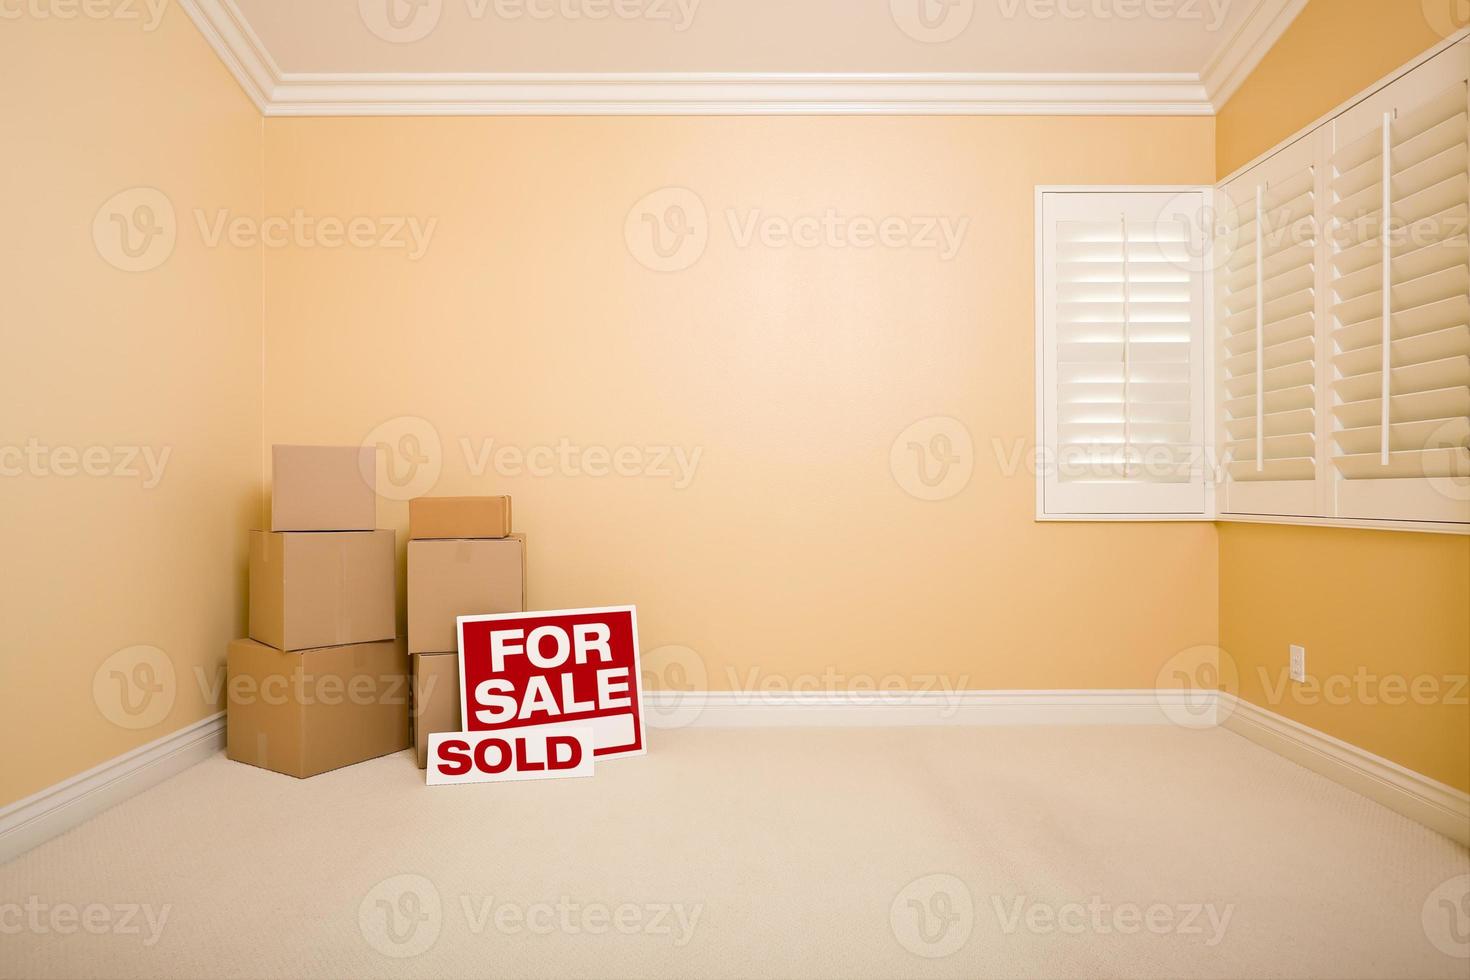 Boxes, Sale and Sold Real Estate Signs in Empty Room photo